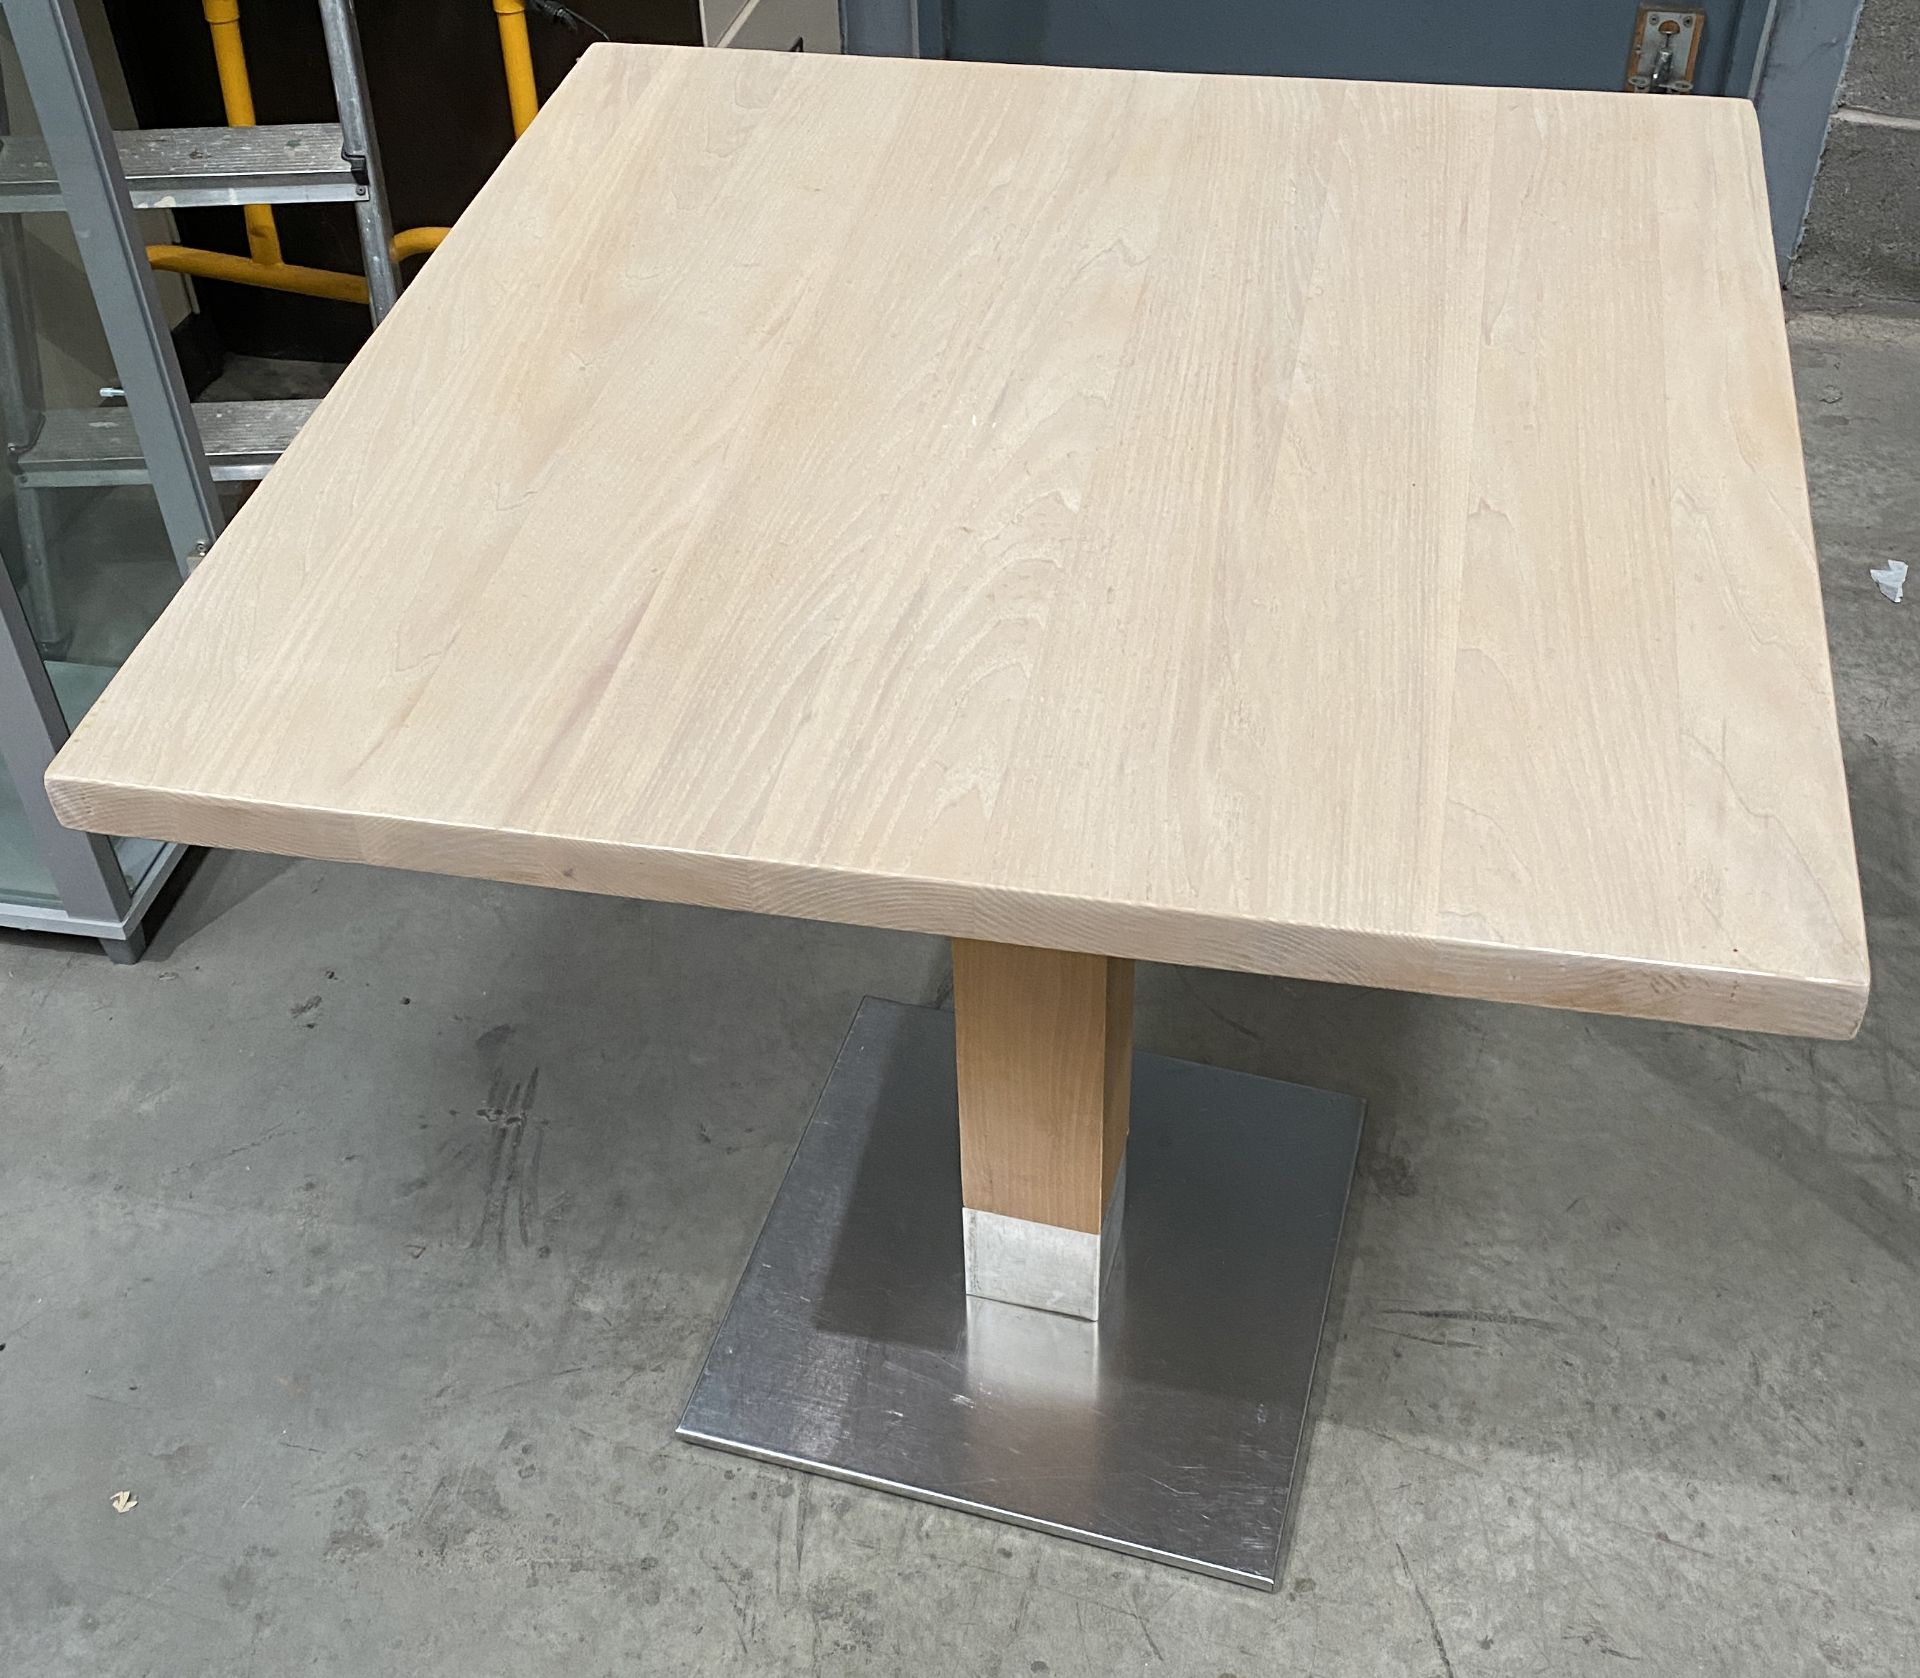 5 x Stainless Steel Based Square Wooden Dining Tables - 70cm x 70cm (75cm high) - Image 2 of 2